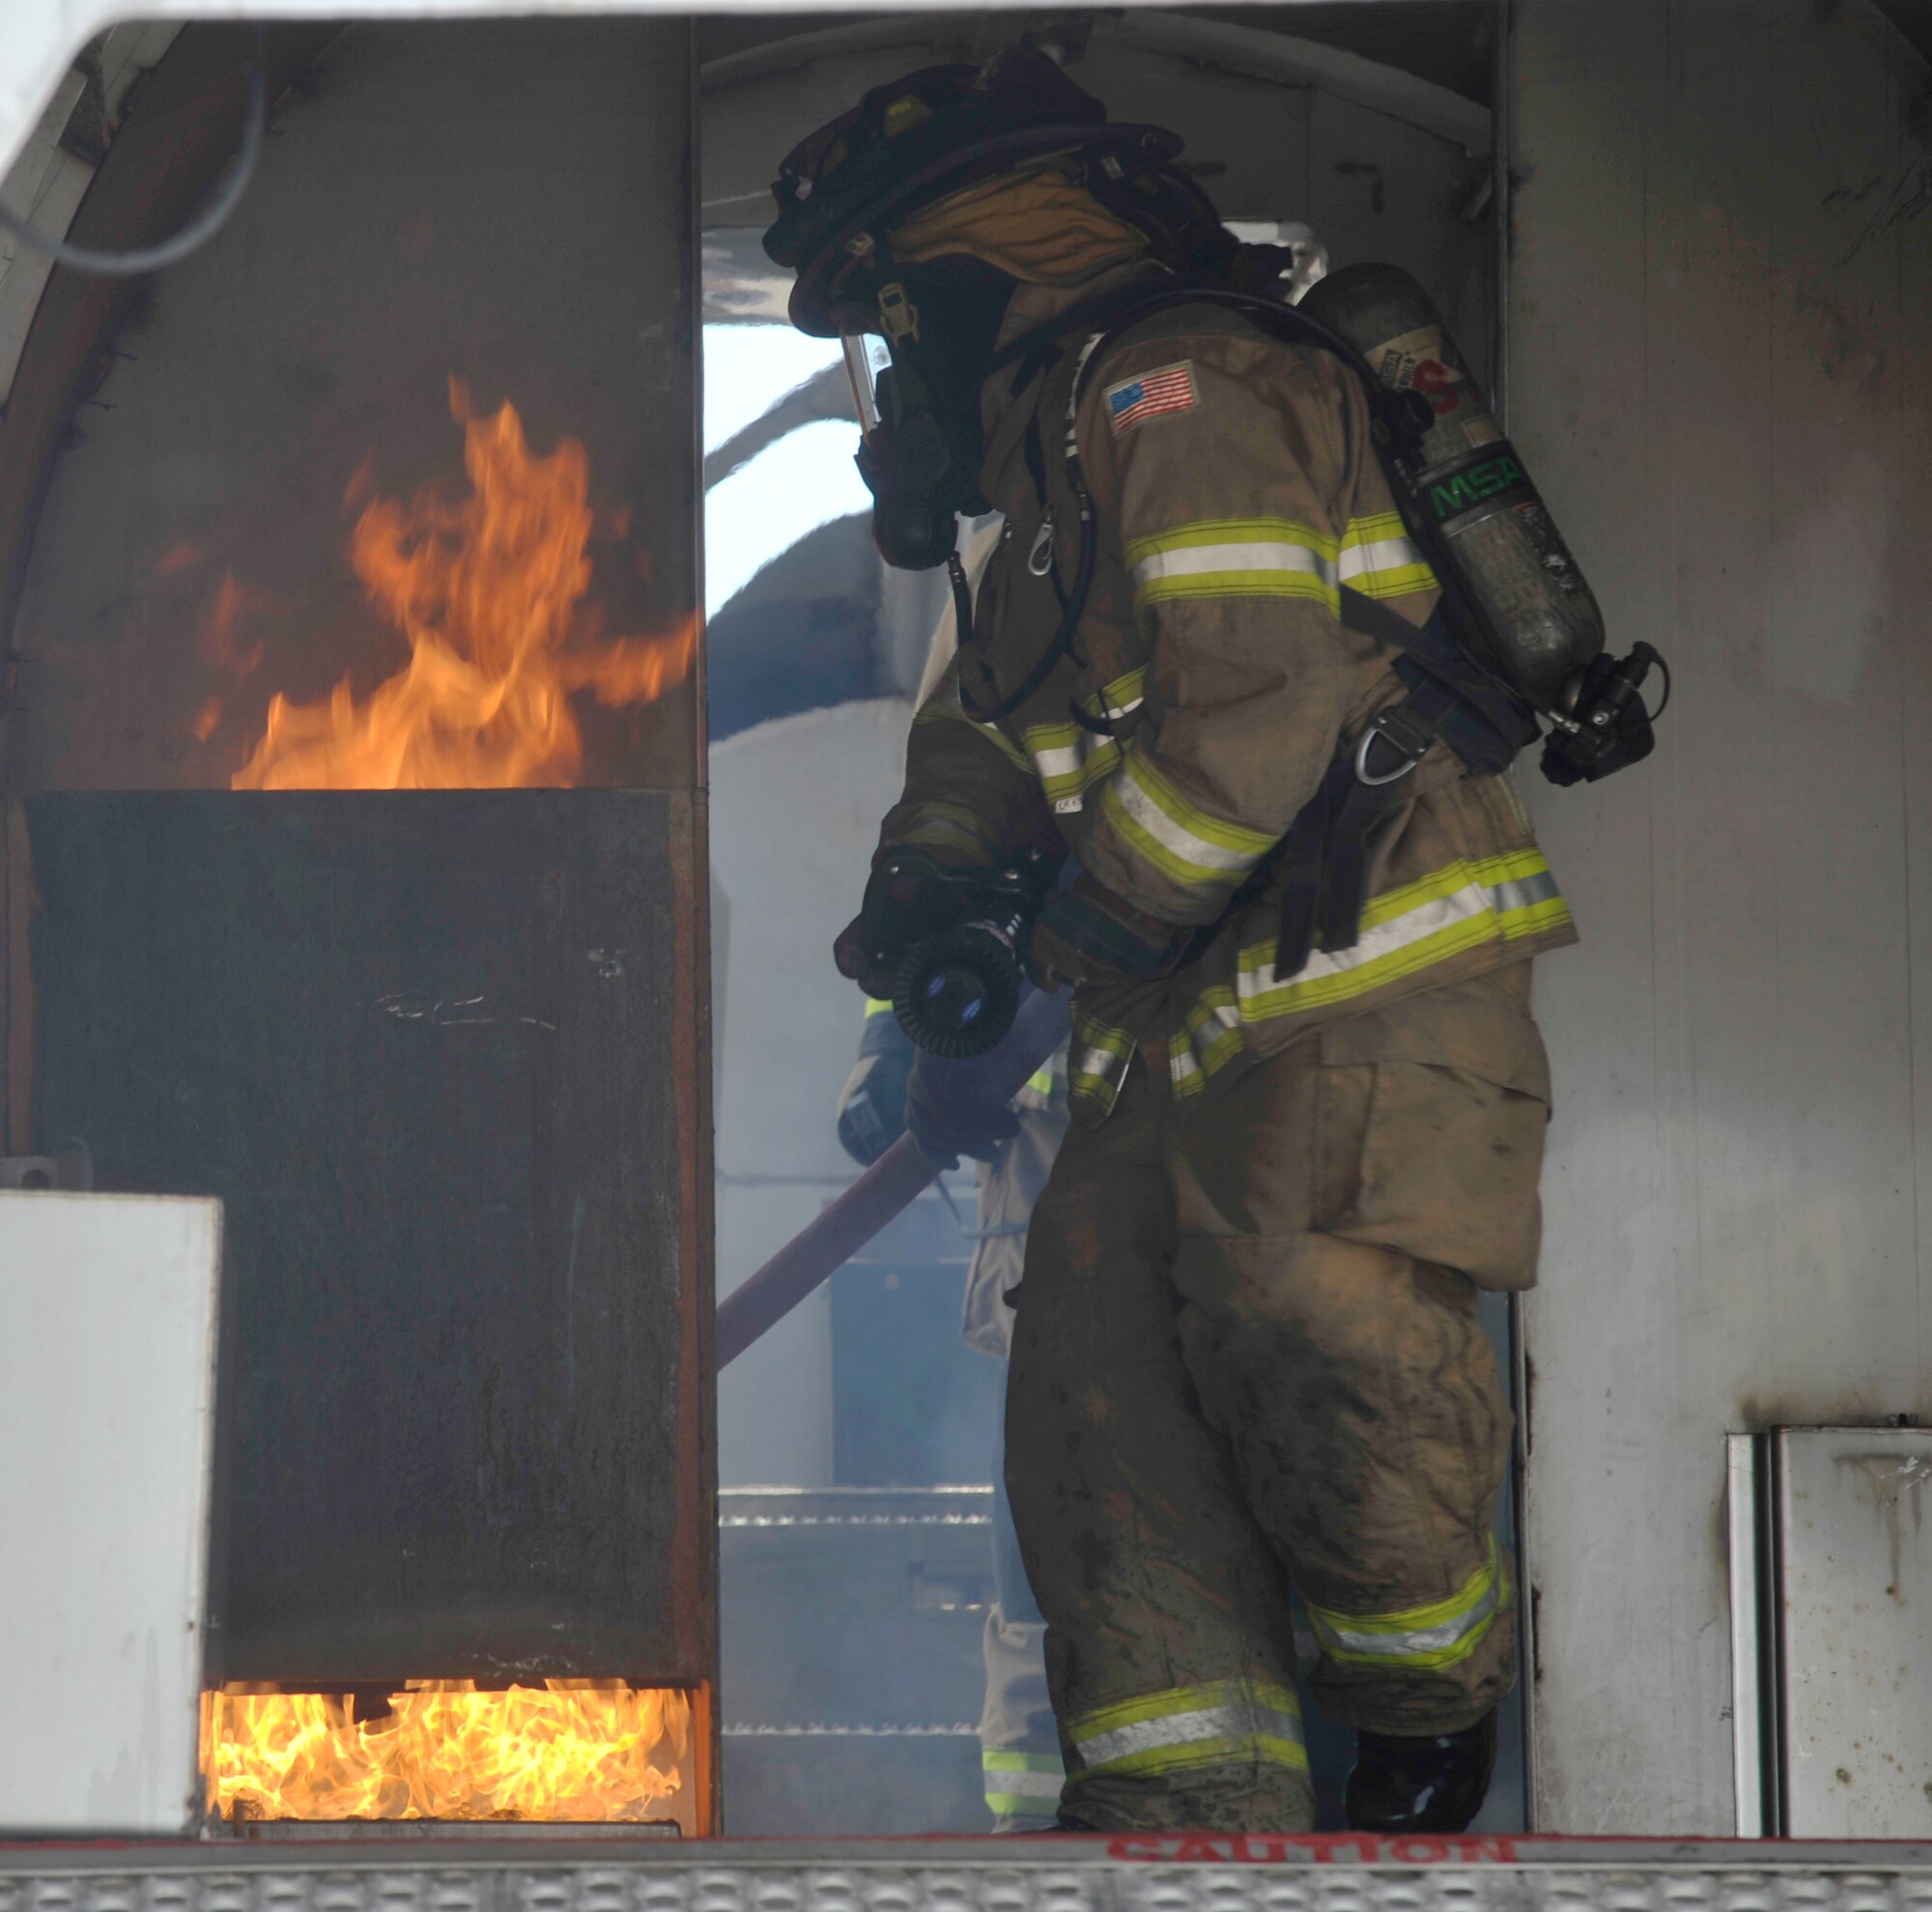 BUCKLEY AIR FORCE BASE, Colo. – Buckley firefighters along with members of Sable Altura Fire Department extinguish a fire inside of a mobile air fire trainer, May 30, 2012.  The training was hosted by the Buckley Fire Department. (U.S. Air Force photo by Airman 1st Class Riley Johnson) 